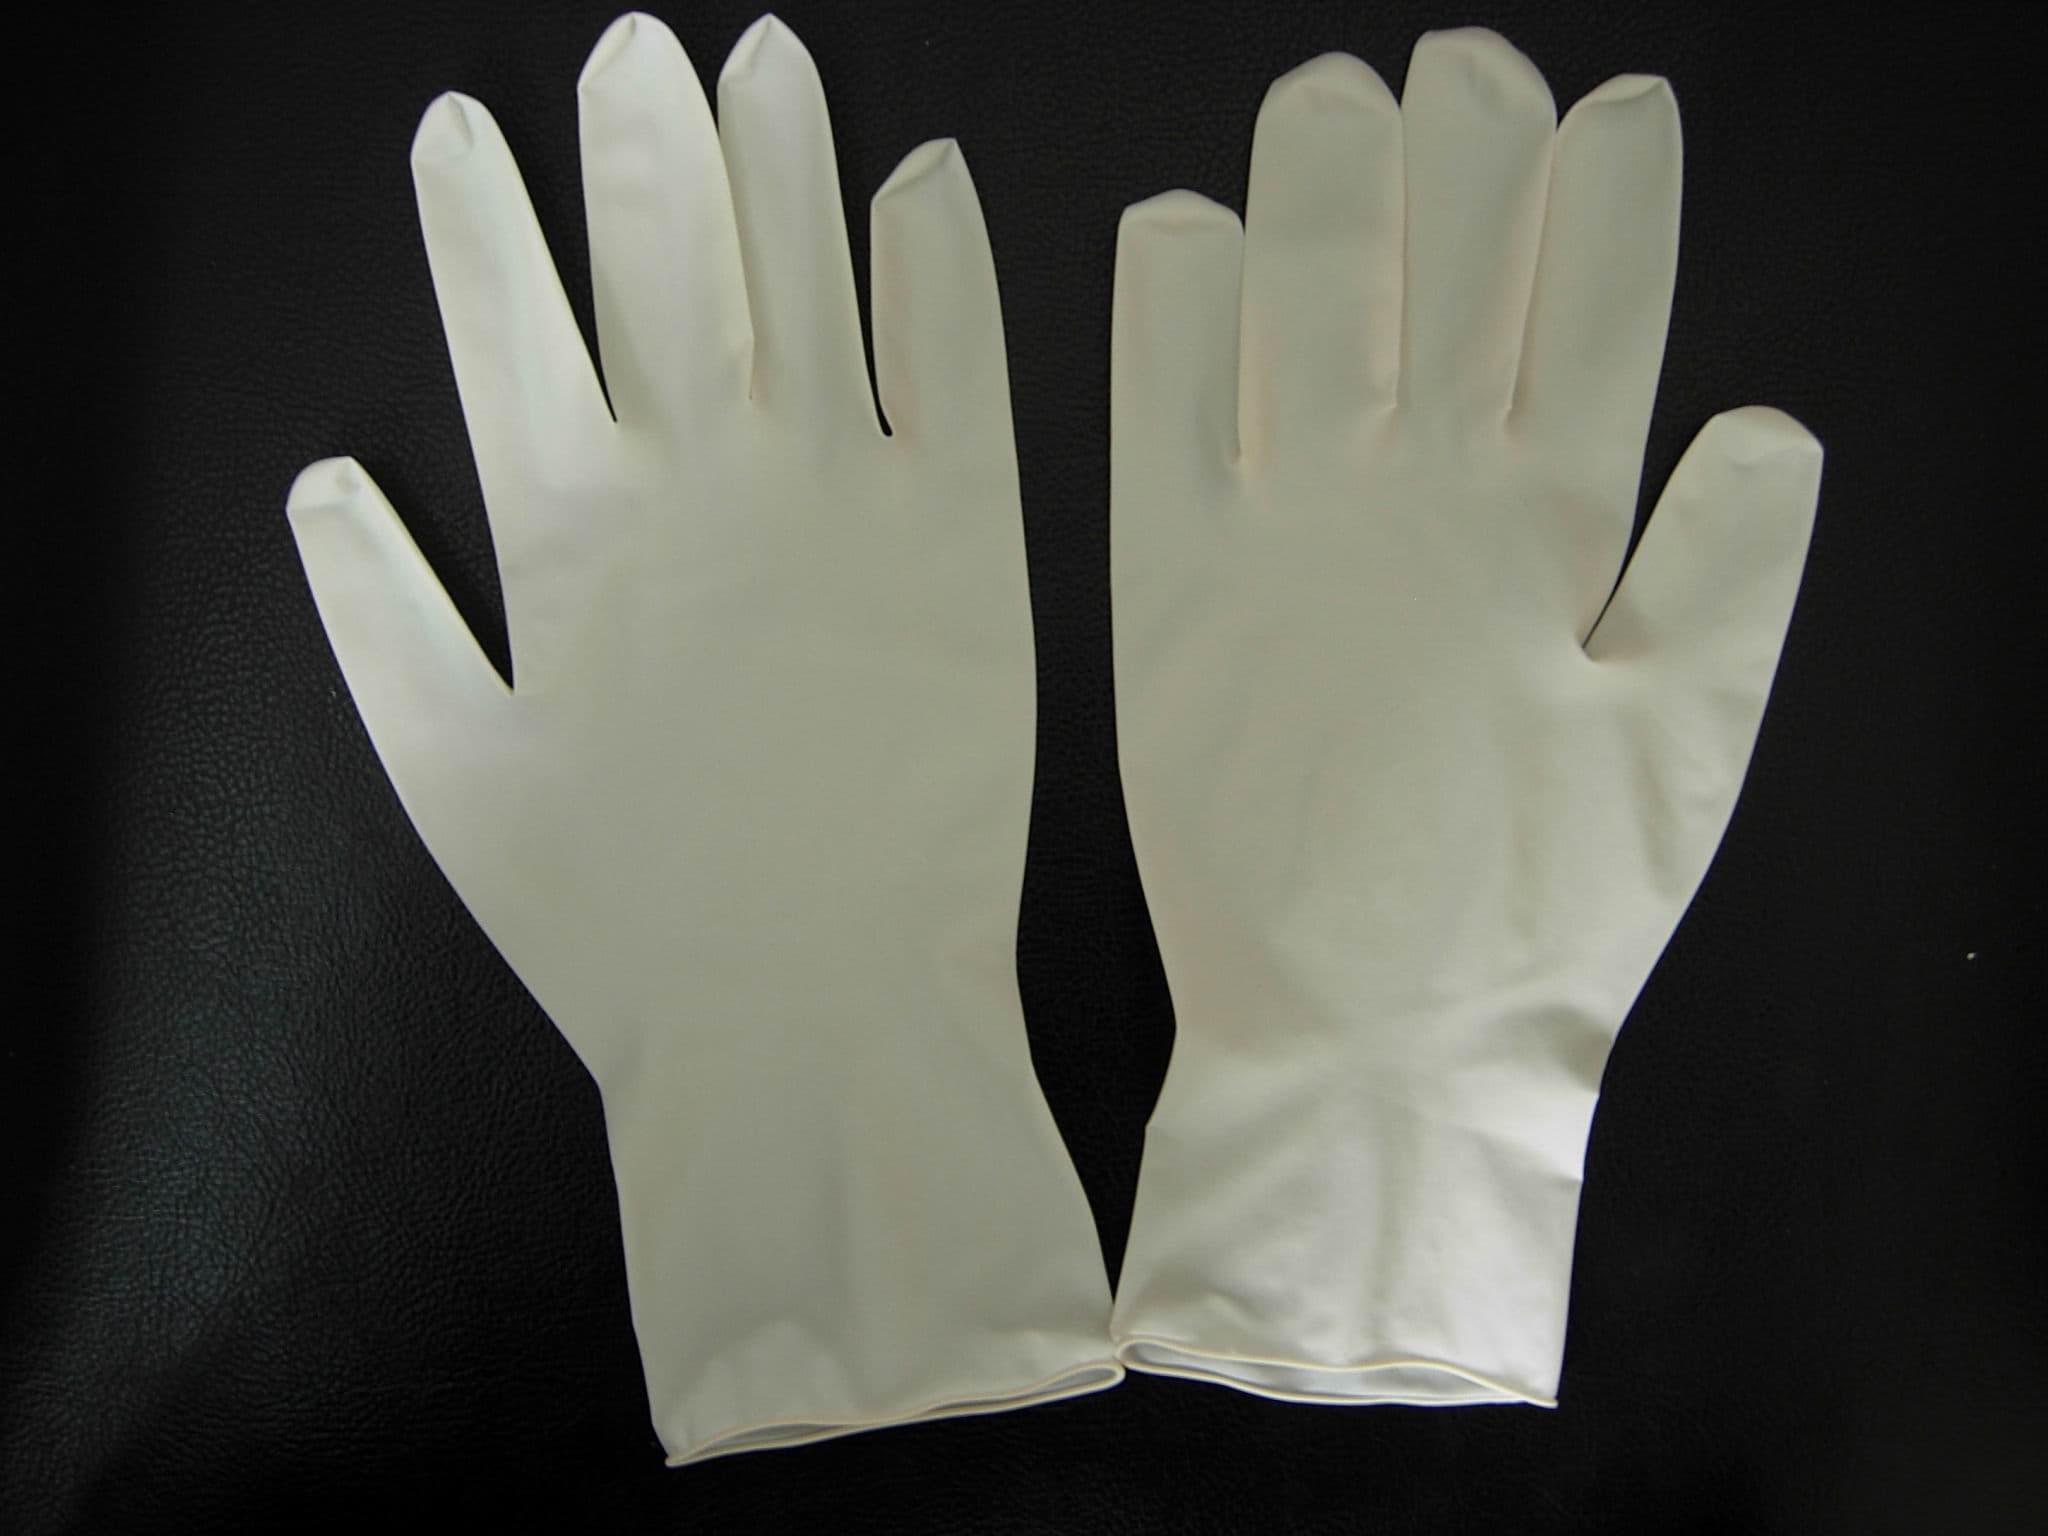 surgical rubber gloves